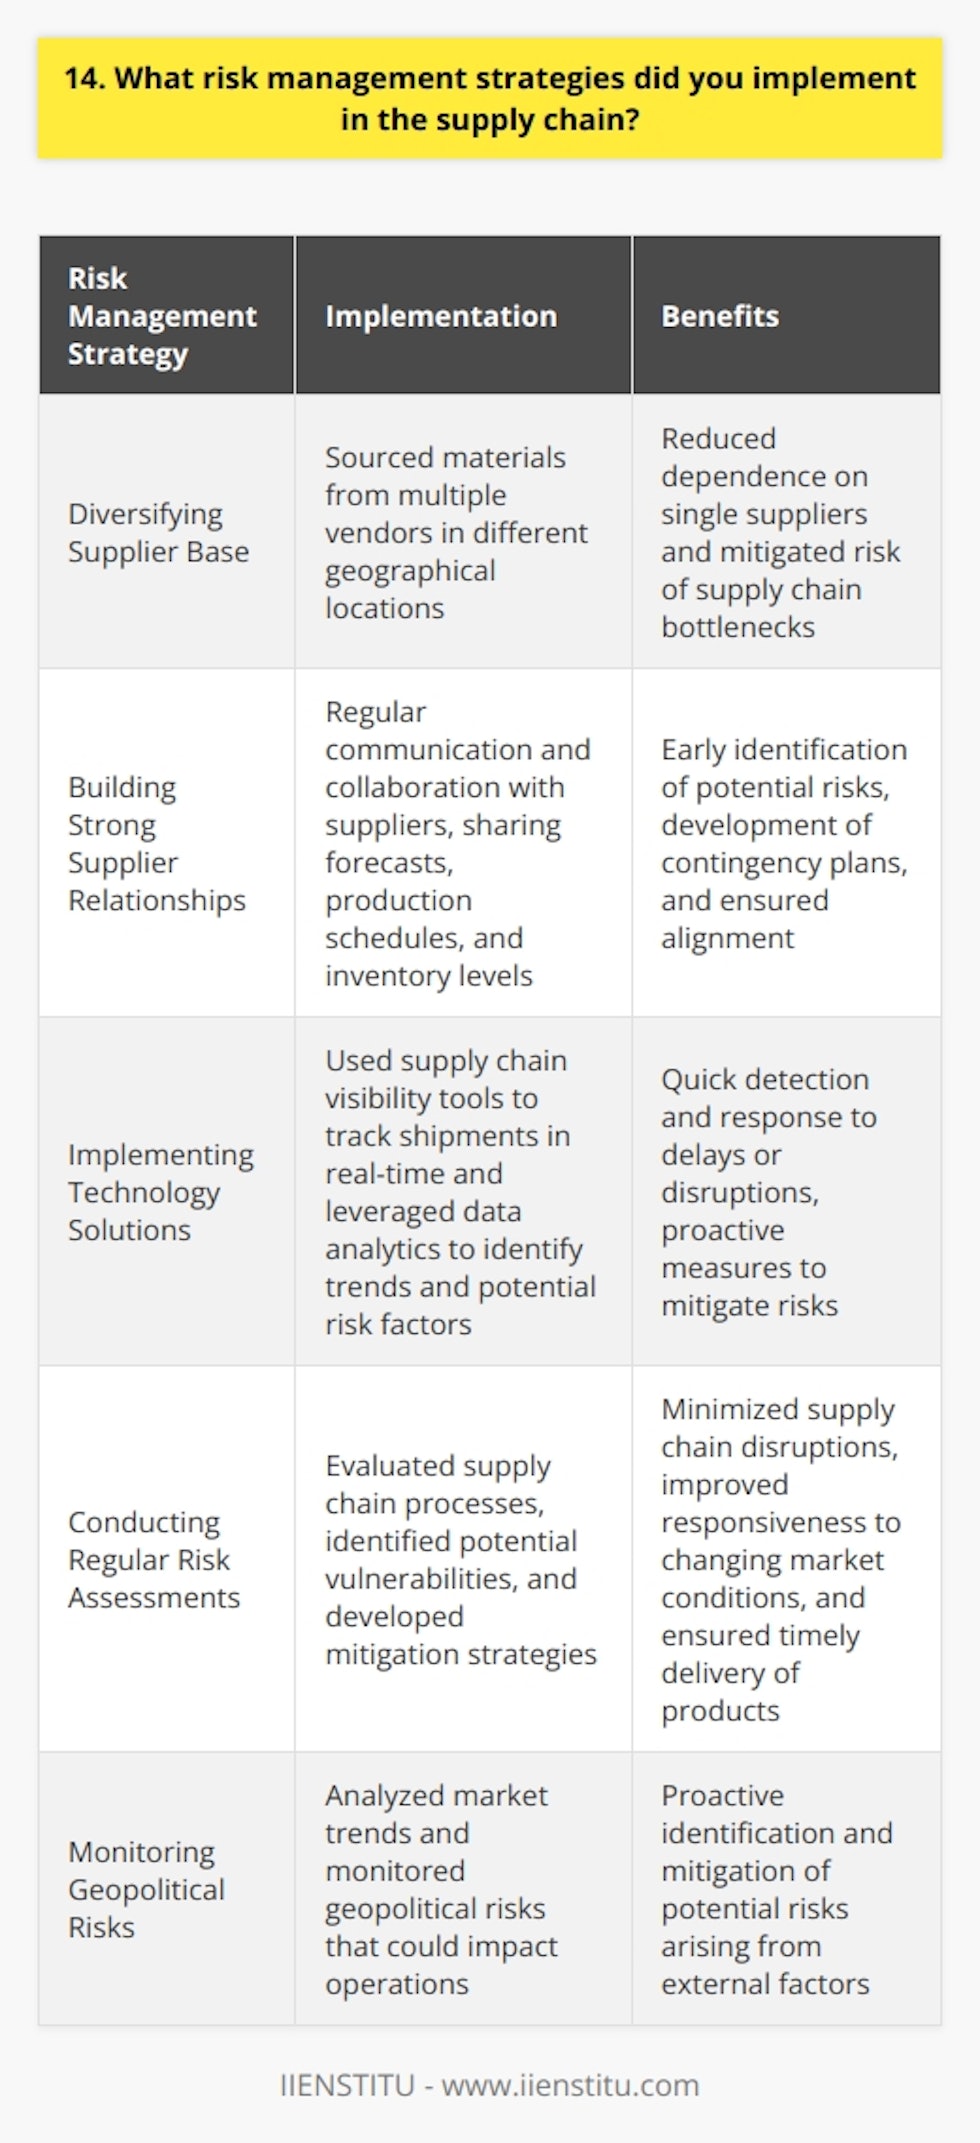 As a supply chain manager, I implemented several risk management strategies to ensure the smooth flow of goods and minimize disruptions. One of the key measures I took was diversifying our supplier base. By sourcing materials from multiple vendors in different geographical locations, we reduced our dependence on any single supplier and mitigated the risk of supply chain bottlenecks. Building Strong Supplier Relationships I also focused on building strong relationships with our suppliers. Regular communication and collaboration helped us identify potential risks early on and develop contingency plans together. We shared forecasts, production schedules, and inventory levels to ensure alignment and avoid surprises. Implementing Technology Solutions To further enhance our risk management capabilities, I implemented advanced technology solutions. We used supply chain visibility tools to track shipments in real-time, enabling us to quickly detect and respond to any delays or disruptions. Additionally, we leveraged data analytics to identify trends, patterns, and potential risk factors, allowing us to take proactive measures. Conducting Regular Risk Assessments Another critical aspect of my risk management approach was conducting regular risk assessments. We evaluated our supply chain processes, identified potential vulnerabilities, and developed mitigation strategies. This included assessing supplier performance, analyzing market trends, and monitoring geopolitical risks that could impact our operations. By implementing these risk management strategies, we were able to minimize supply chain disruptions, improve our responsiveness to changing market conditions, and ensure the timely delivery of products to our customers. It was a challenging but rewarding experience that strengthened my problem-solving skills and ability to navigate complex supply chain landscapes.